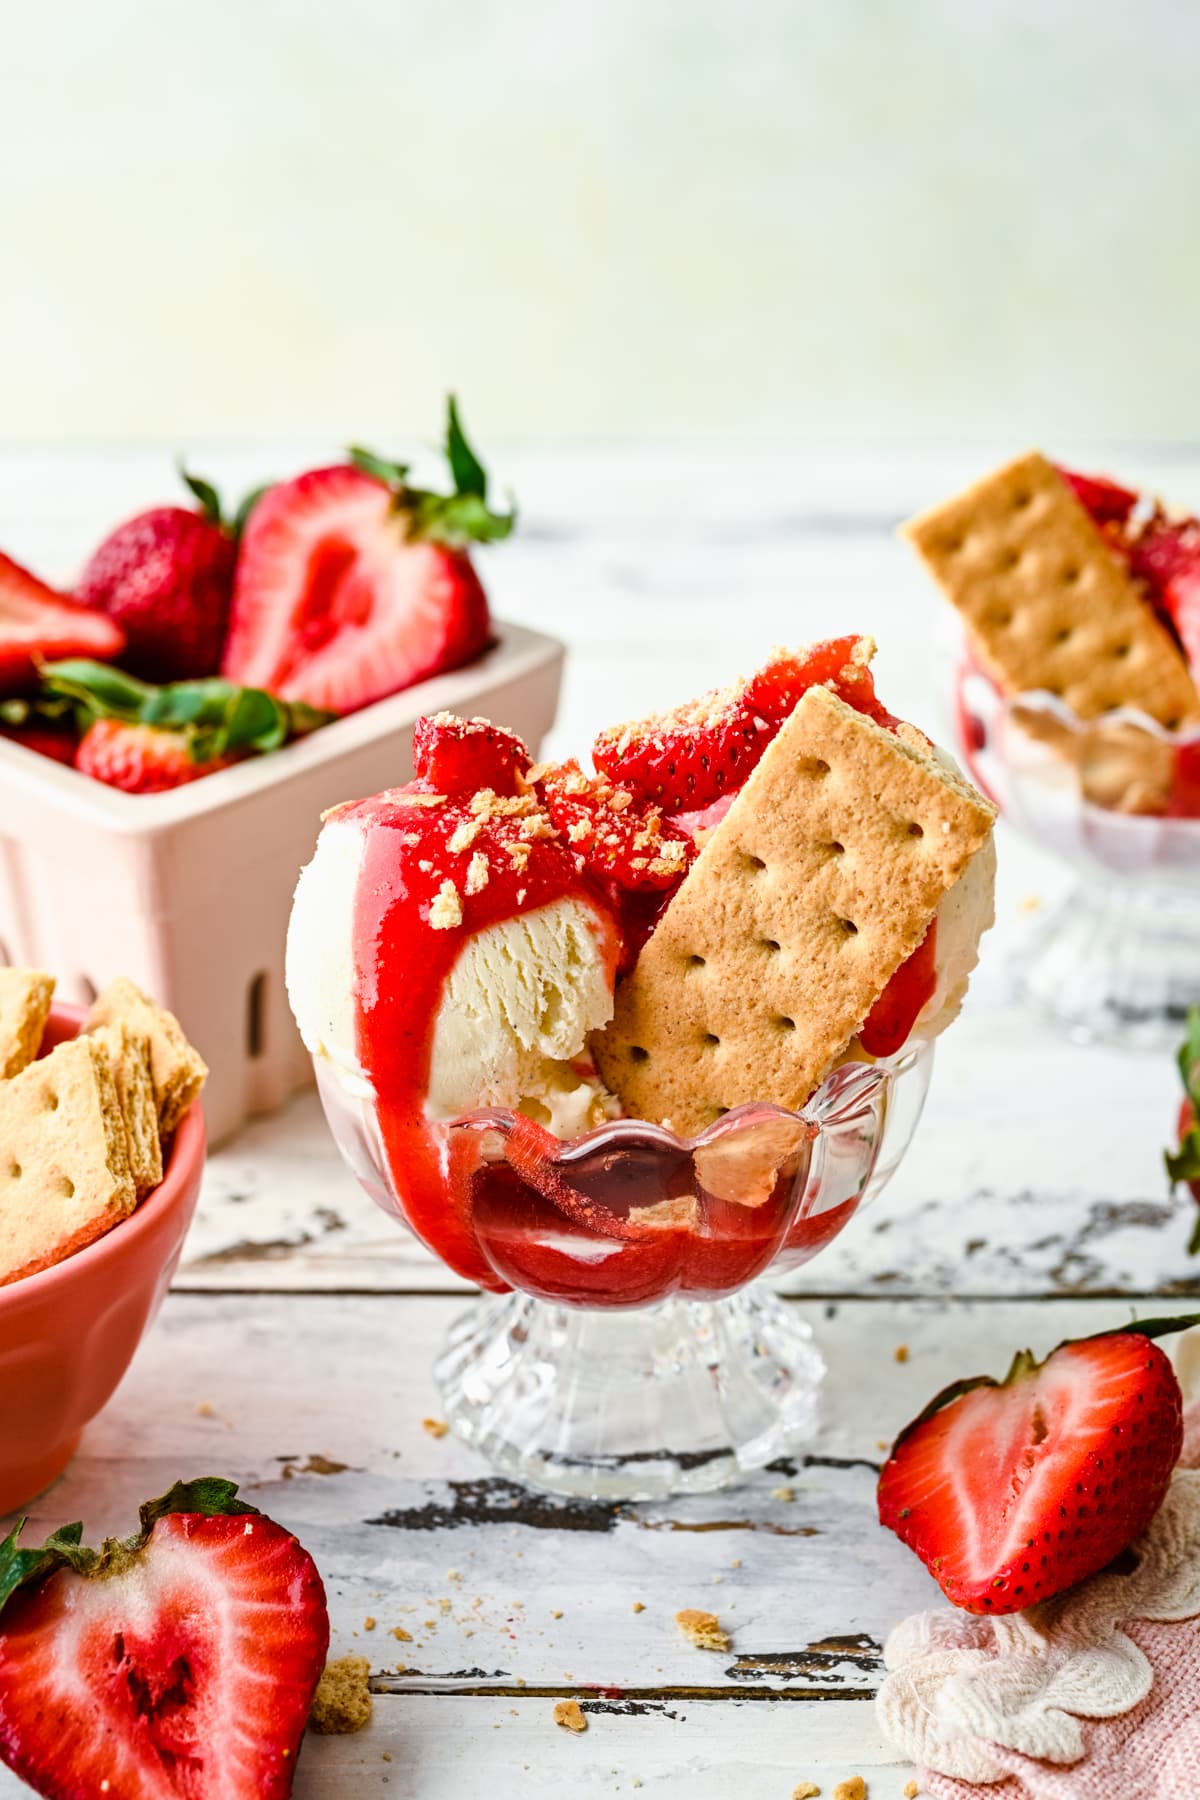 Strawberry coulis on top of an ice cream sundae with graham crackers and strawberries.